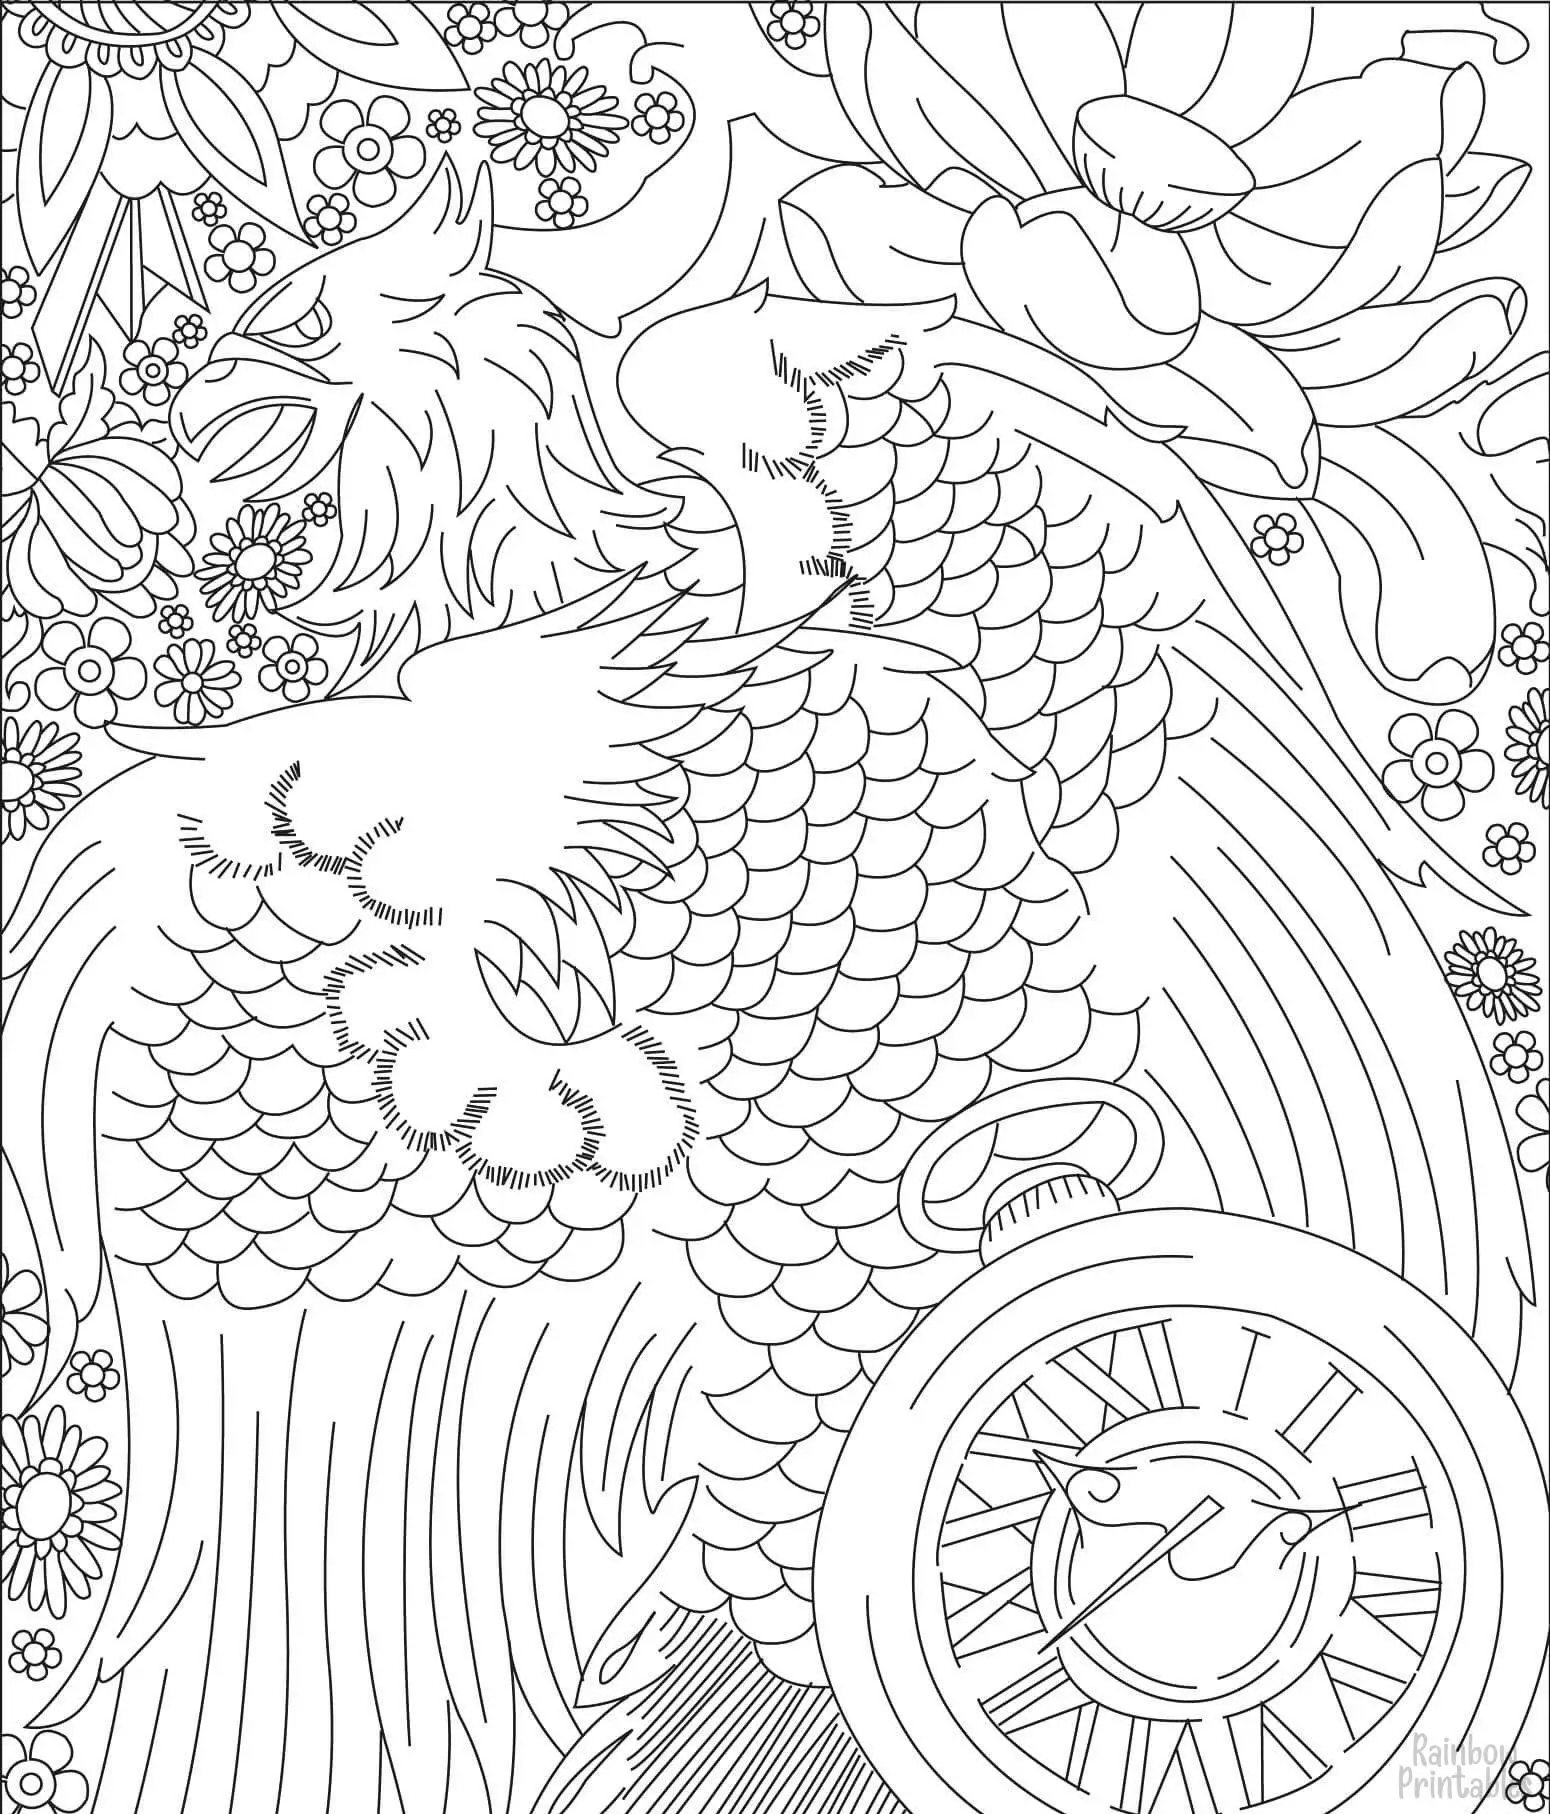 SIMPLE Mandala EAGLET Coloring Pages for Kids Adults Boredom Art Activities Line Art